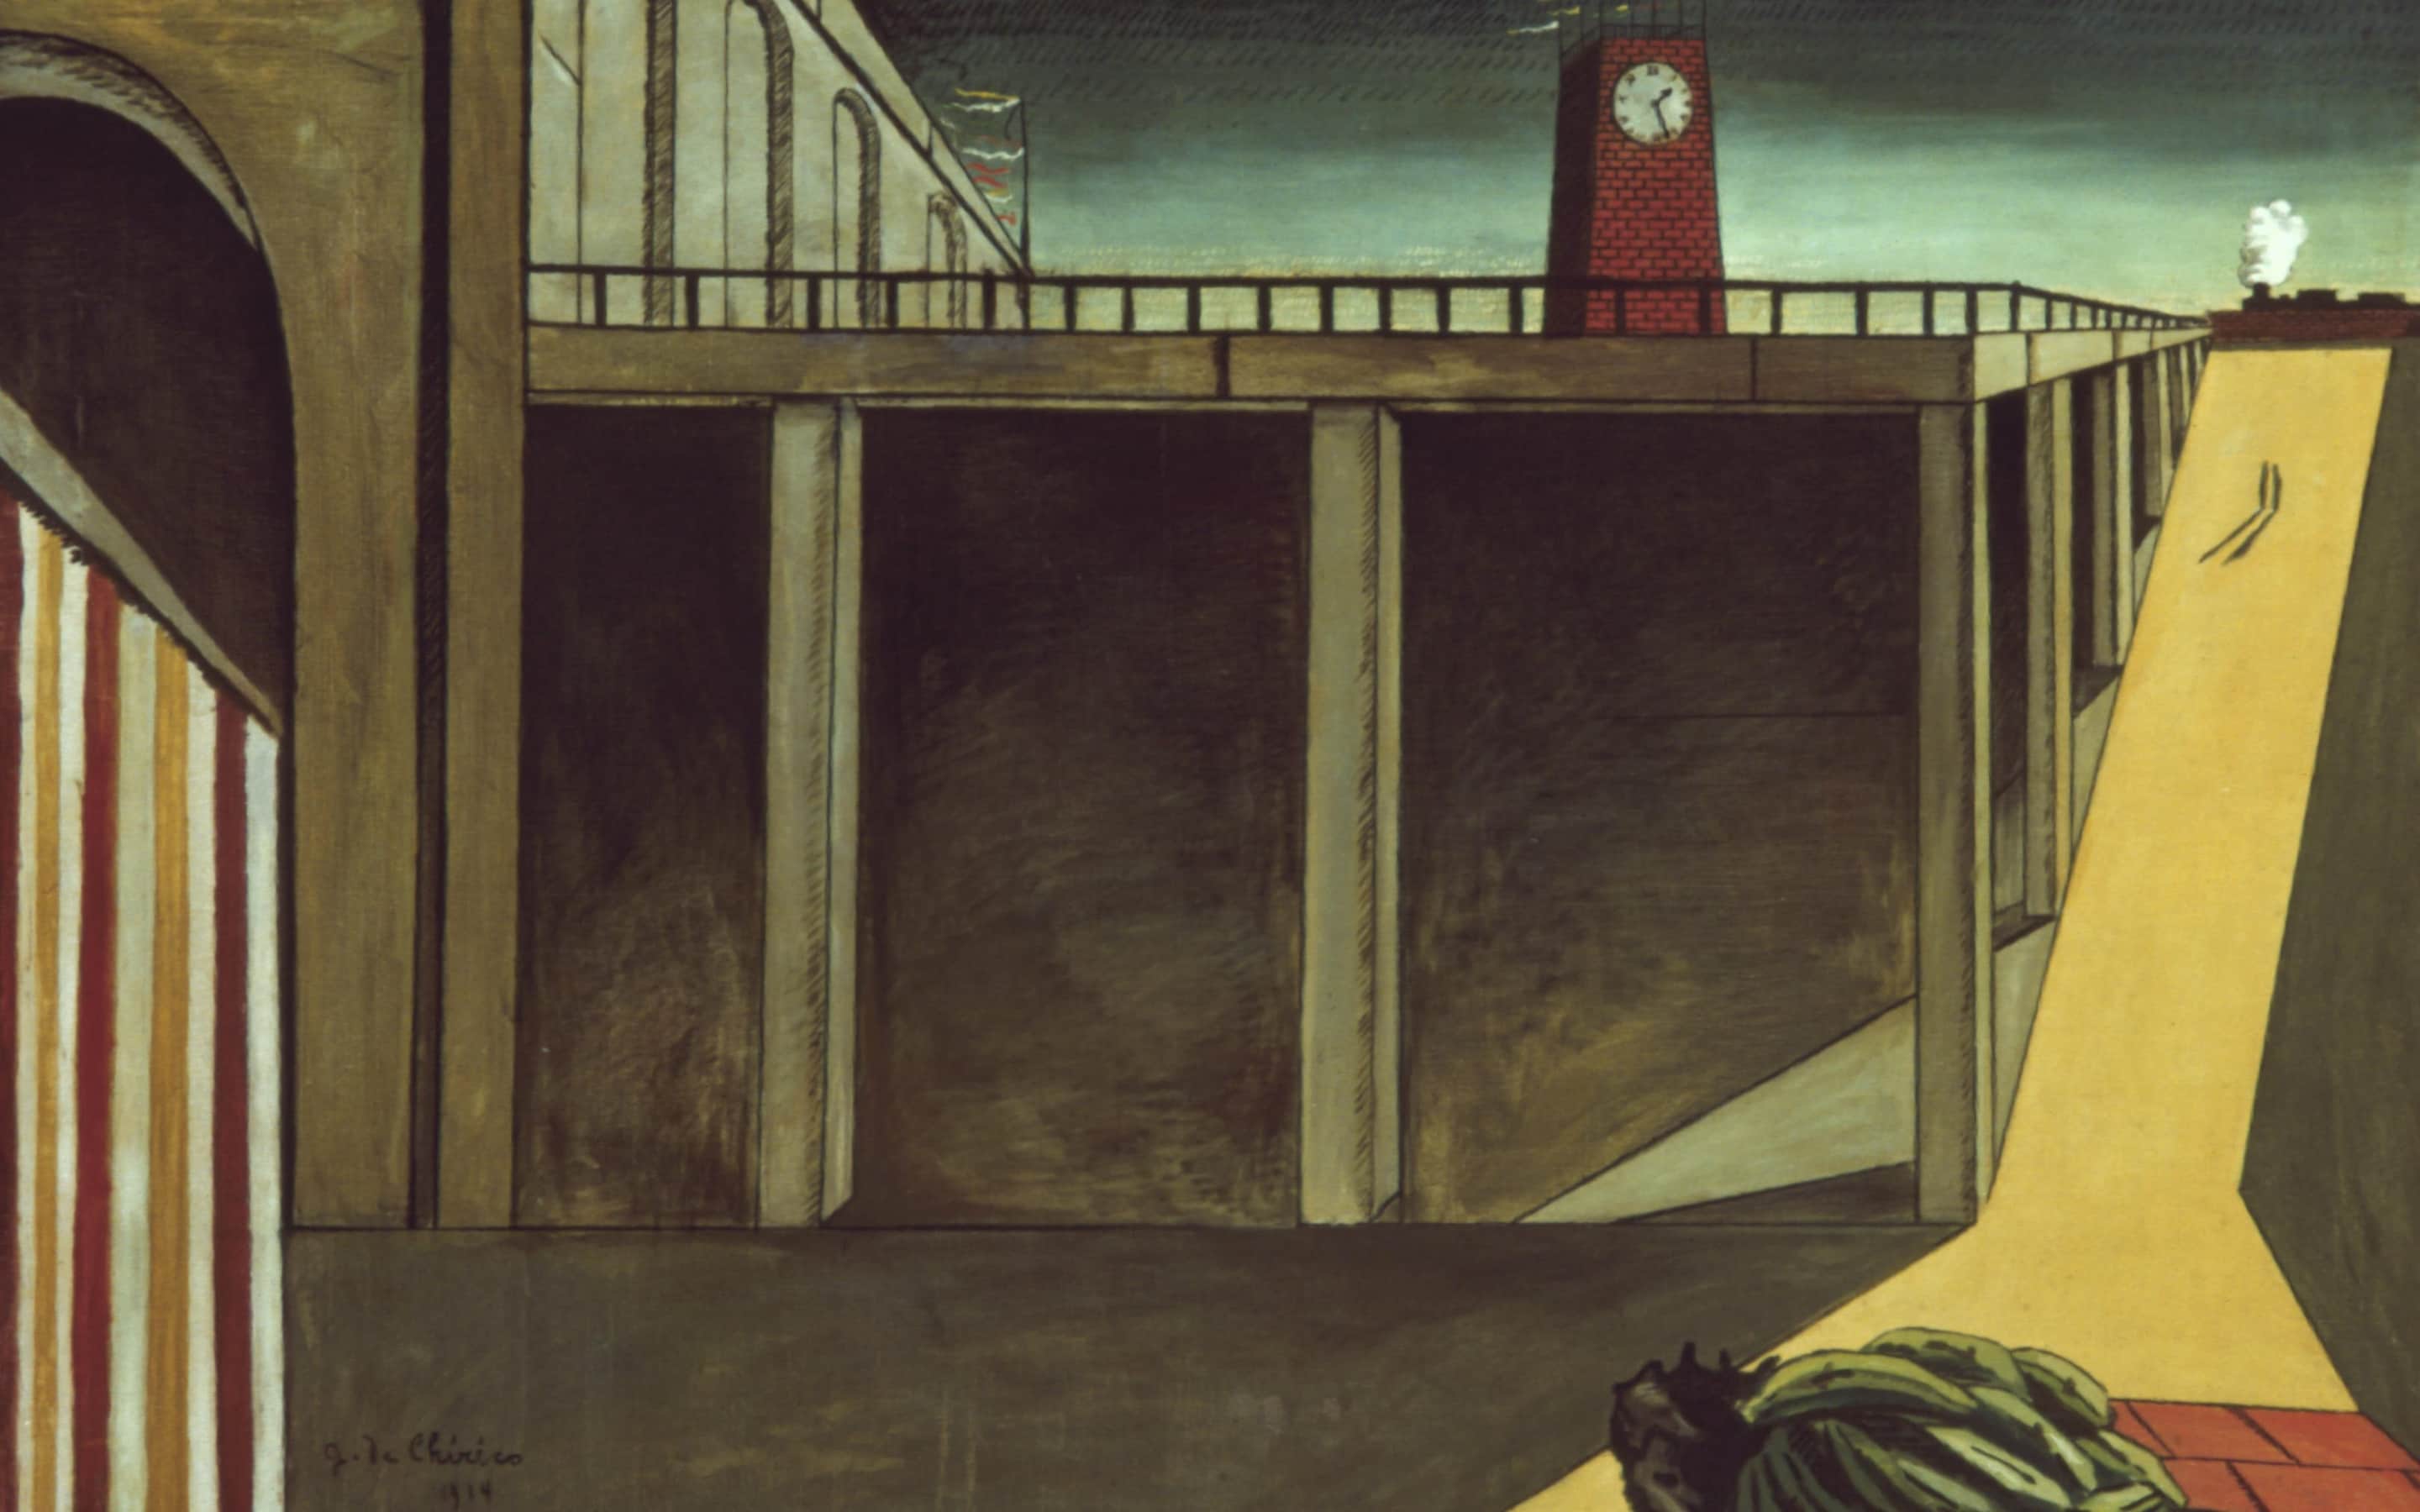 Charles Saatchi's Great Masterpieces: how Giorgio de Chirico's dreamscapes inspired Surrealism